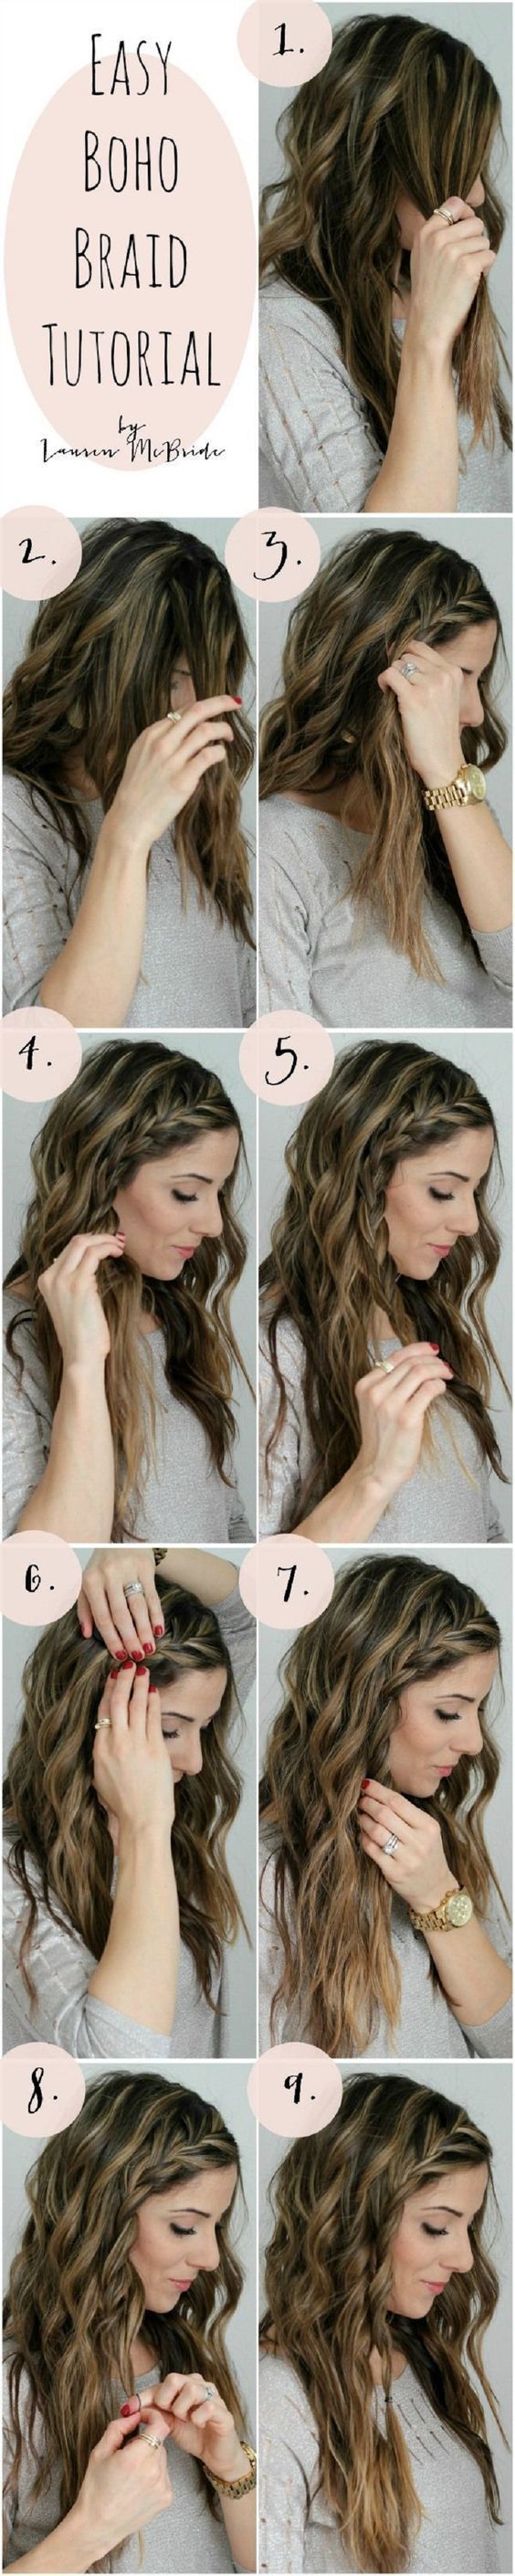 Pretty Braided Crown Hairstyle Tutorial and ideas